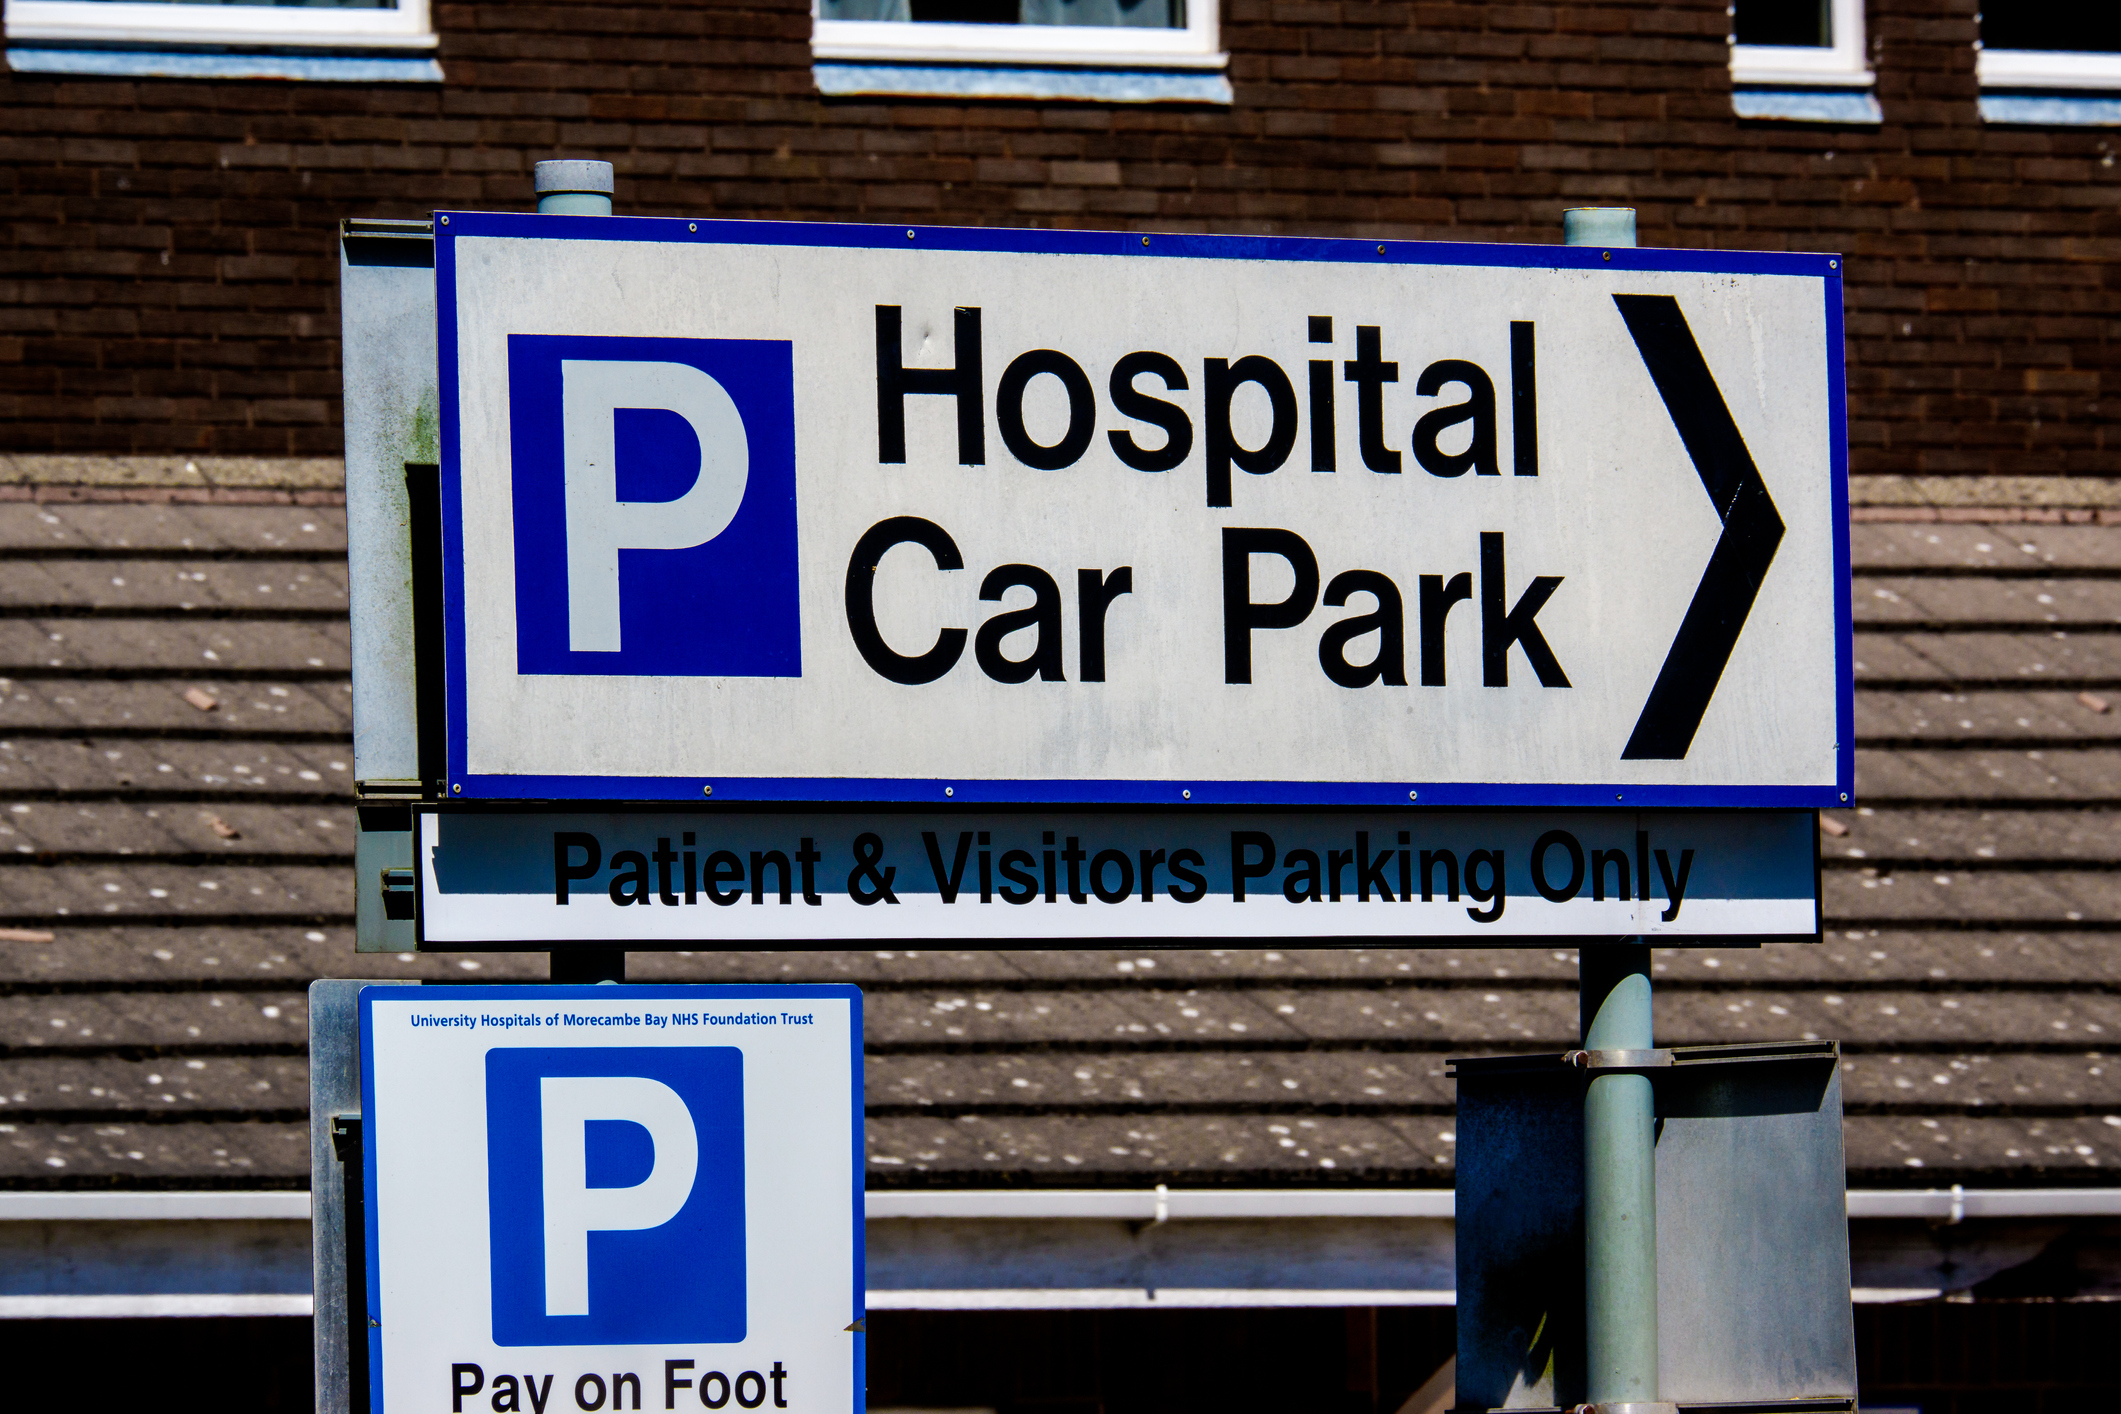 Hospital Parking - Is There Any One Right Way To Do It? 